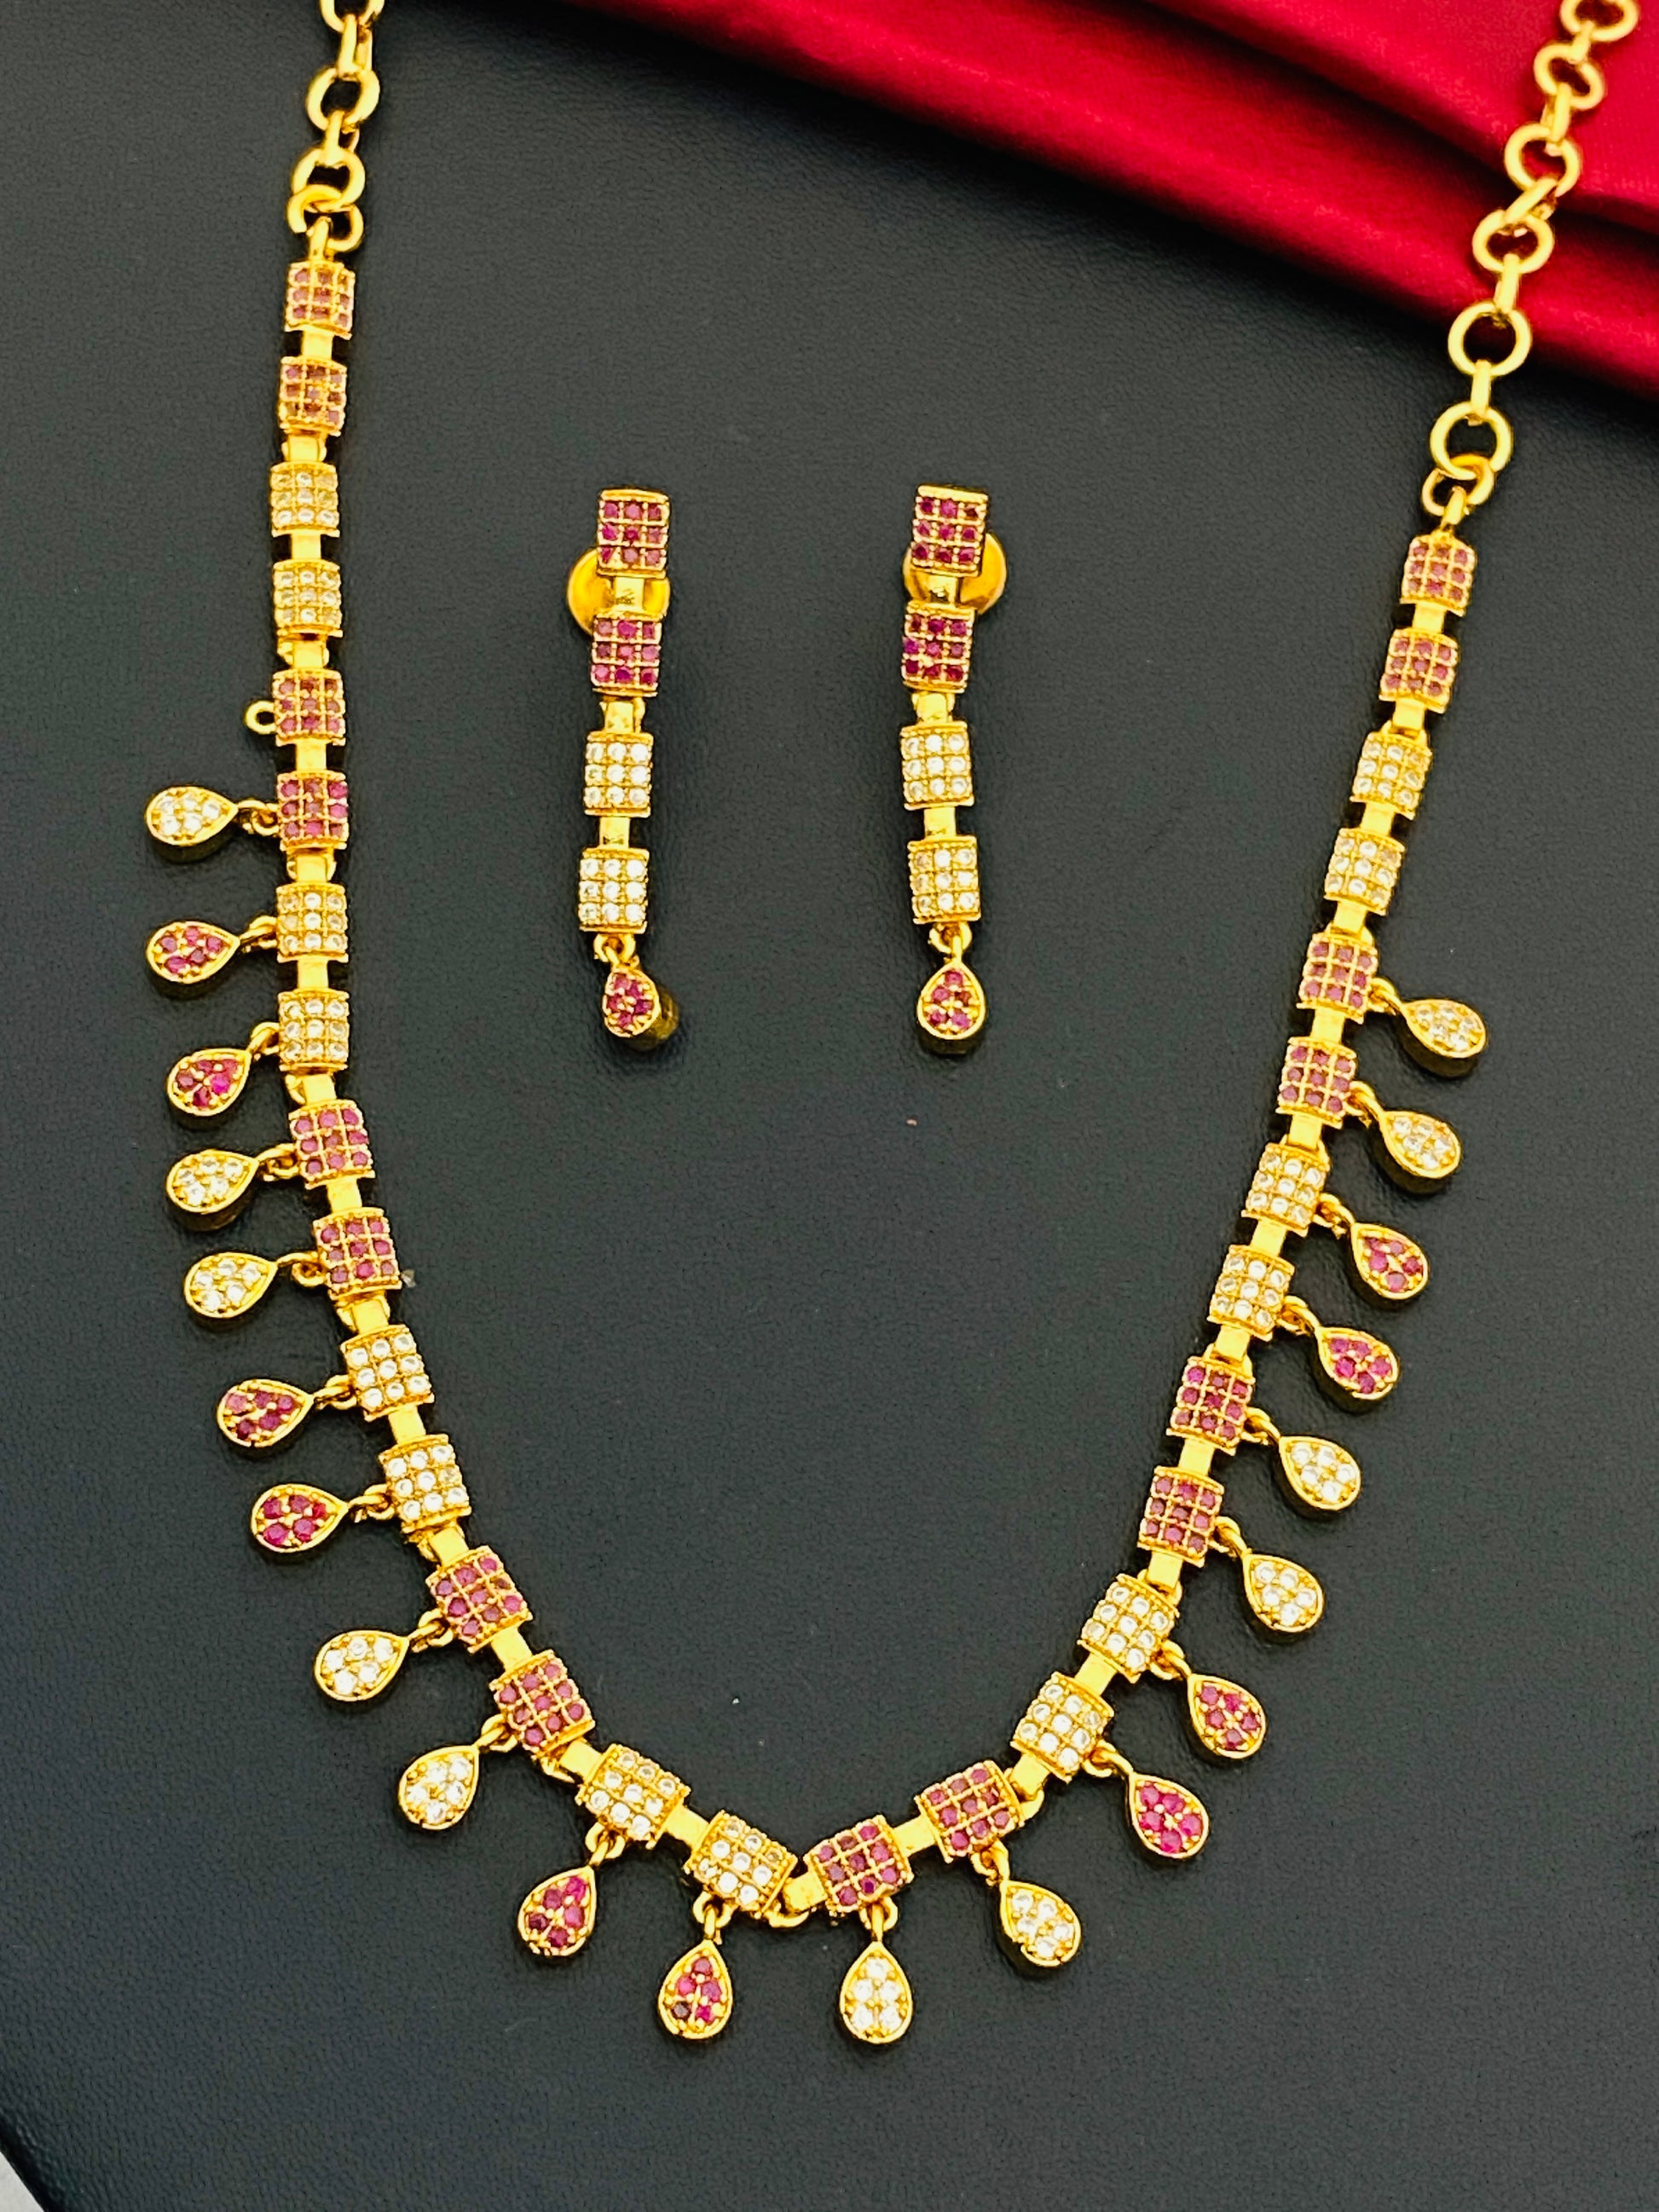 Gold Plated Ruby And White Colored Neclace With Earrings In Gilbert